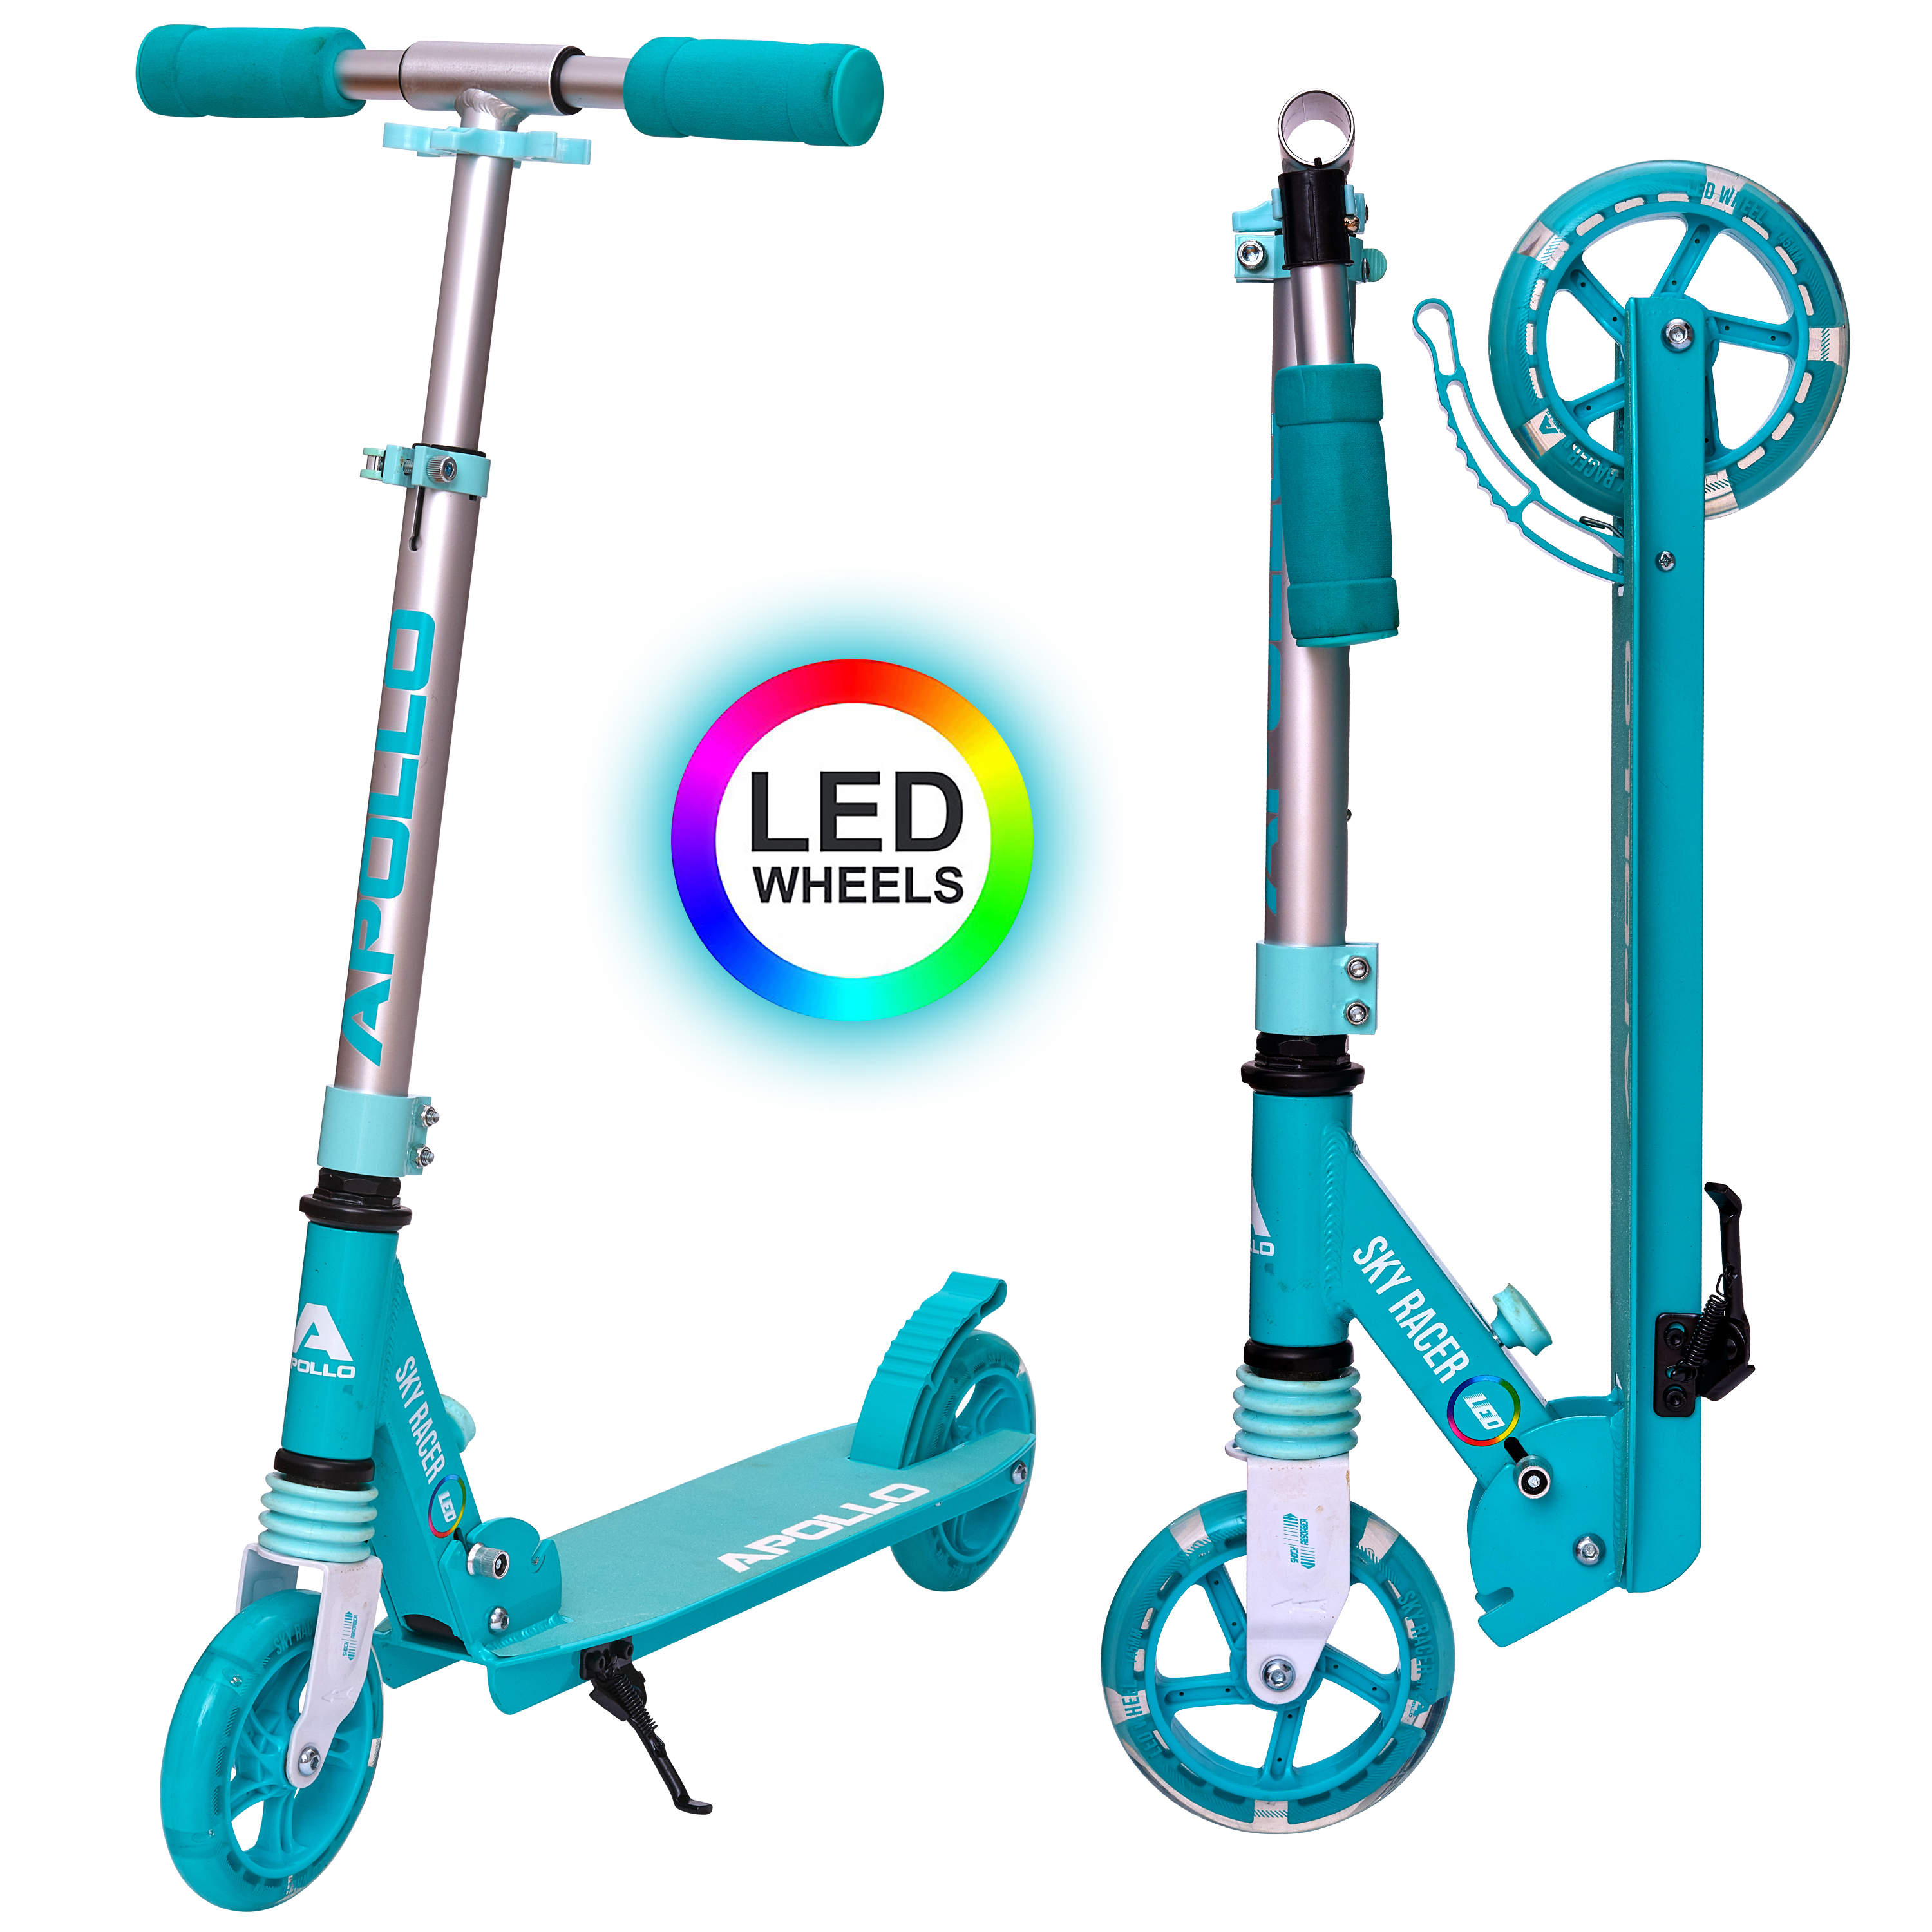 City Scooter - Skyracer LED - Mint -145mm Wheels - von Apollo